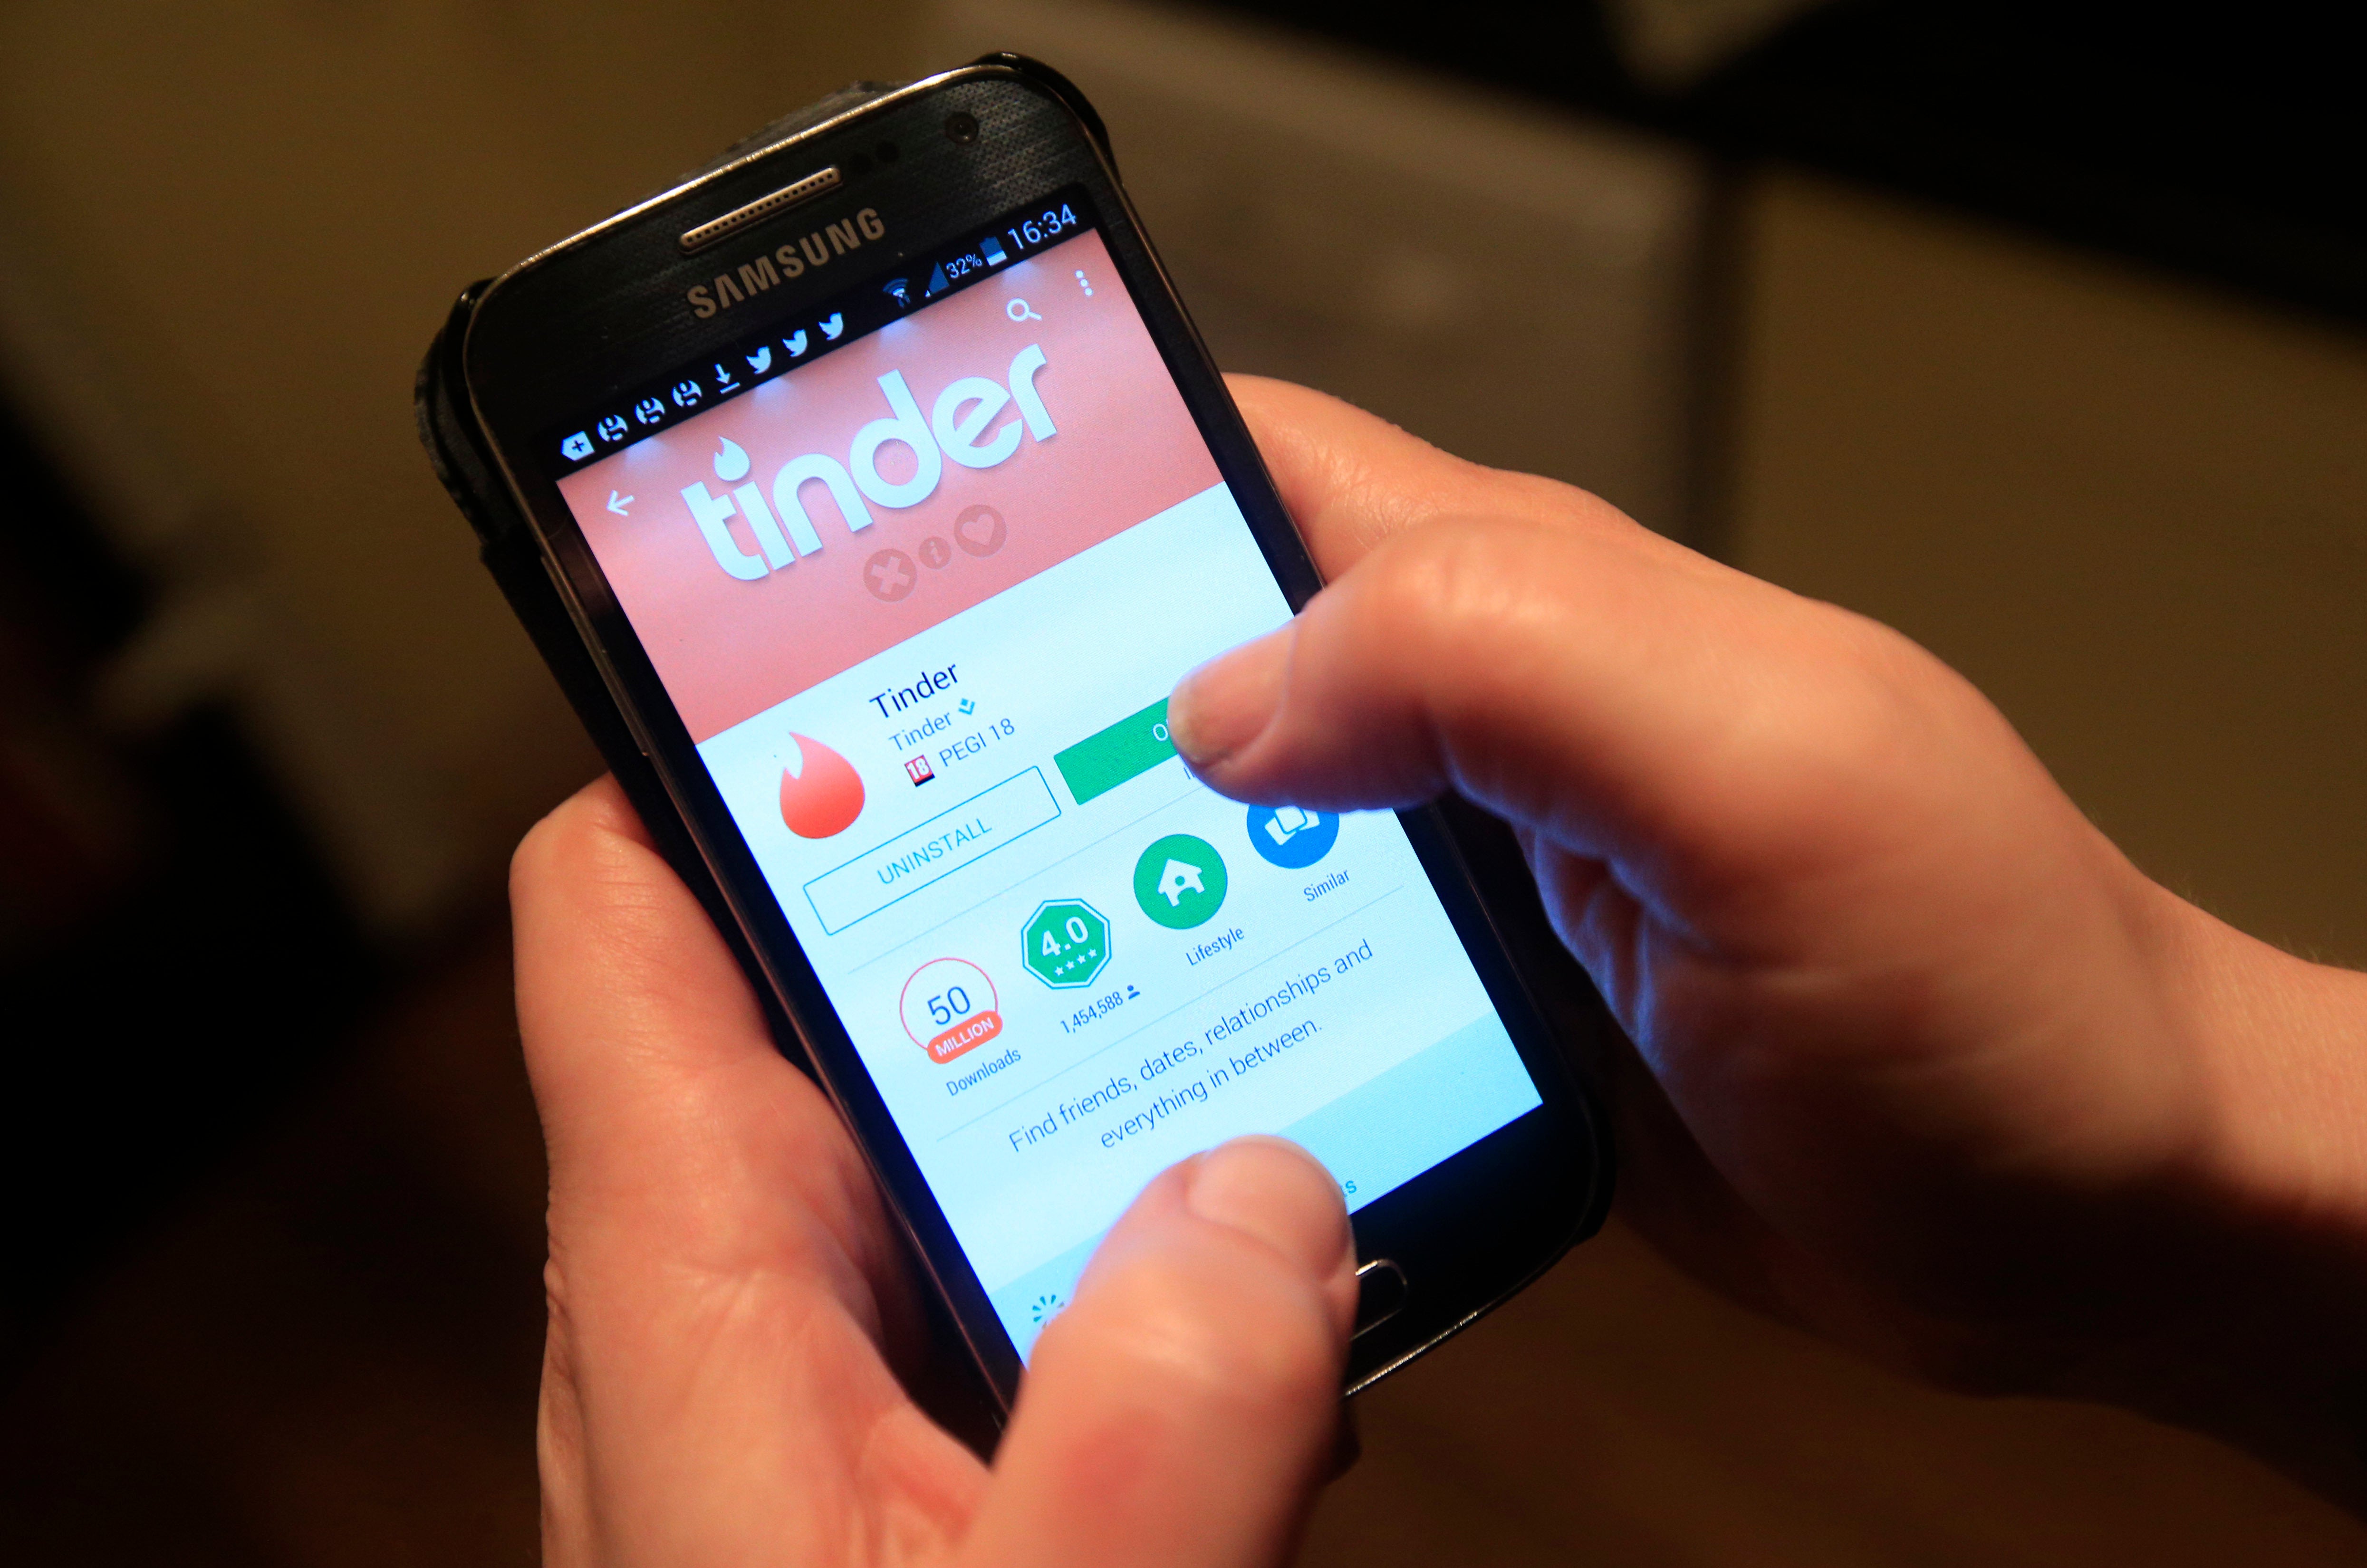 <p>The Tinder app in use on a Samsung smartphone.</p>